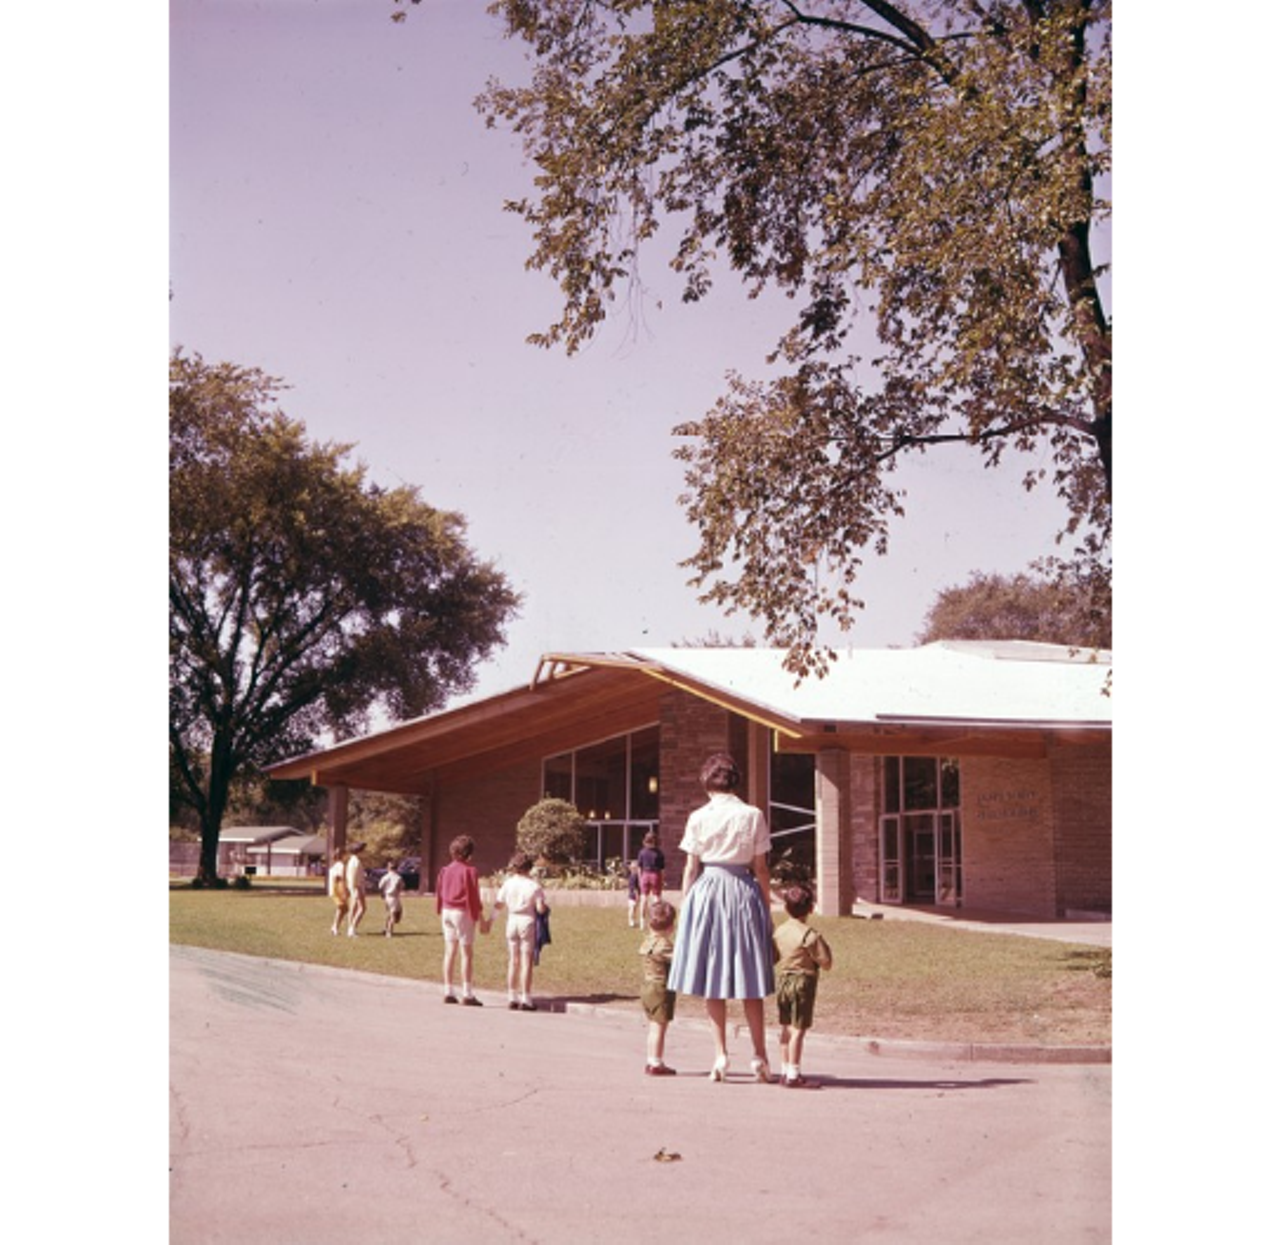 Walking into the Holden Museum. (Circa 1960)